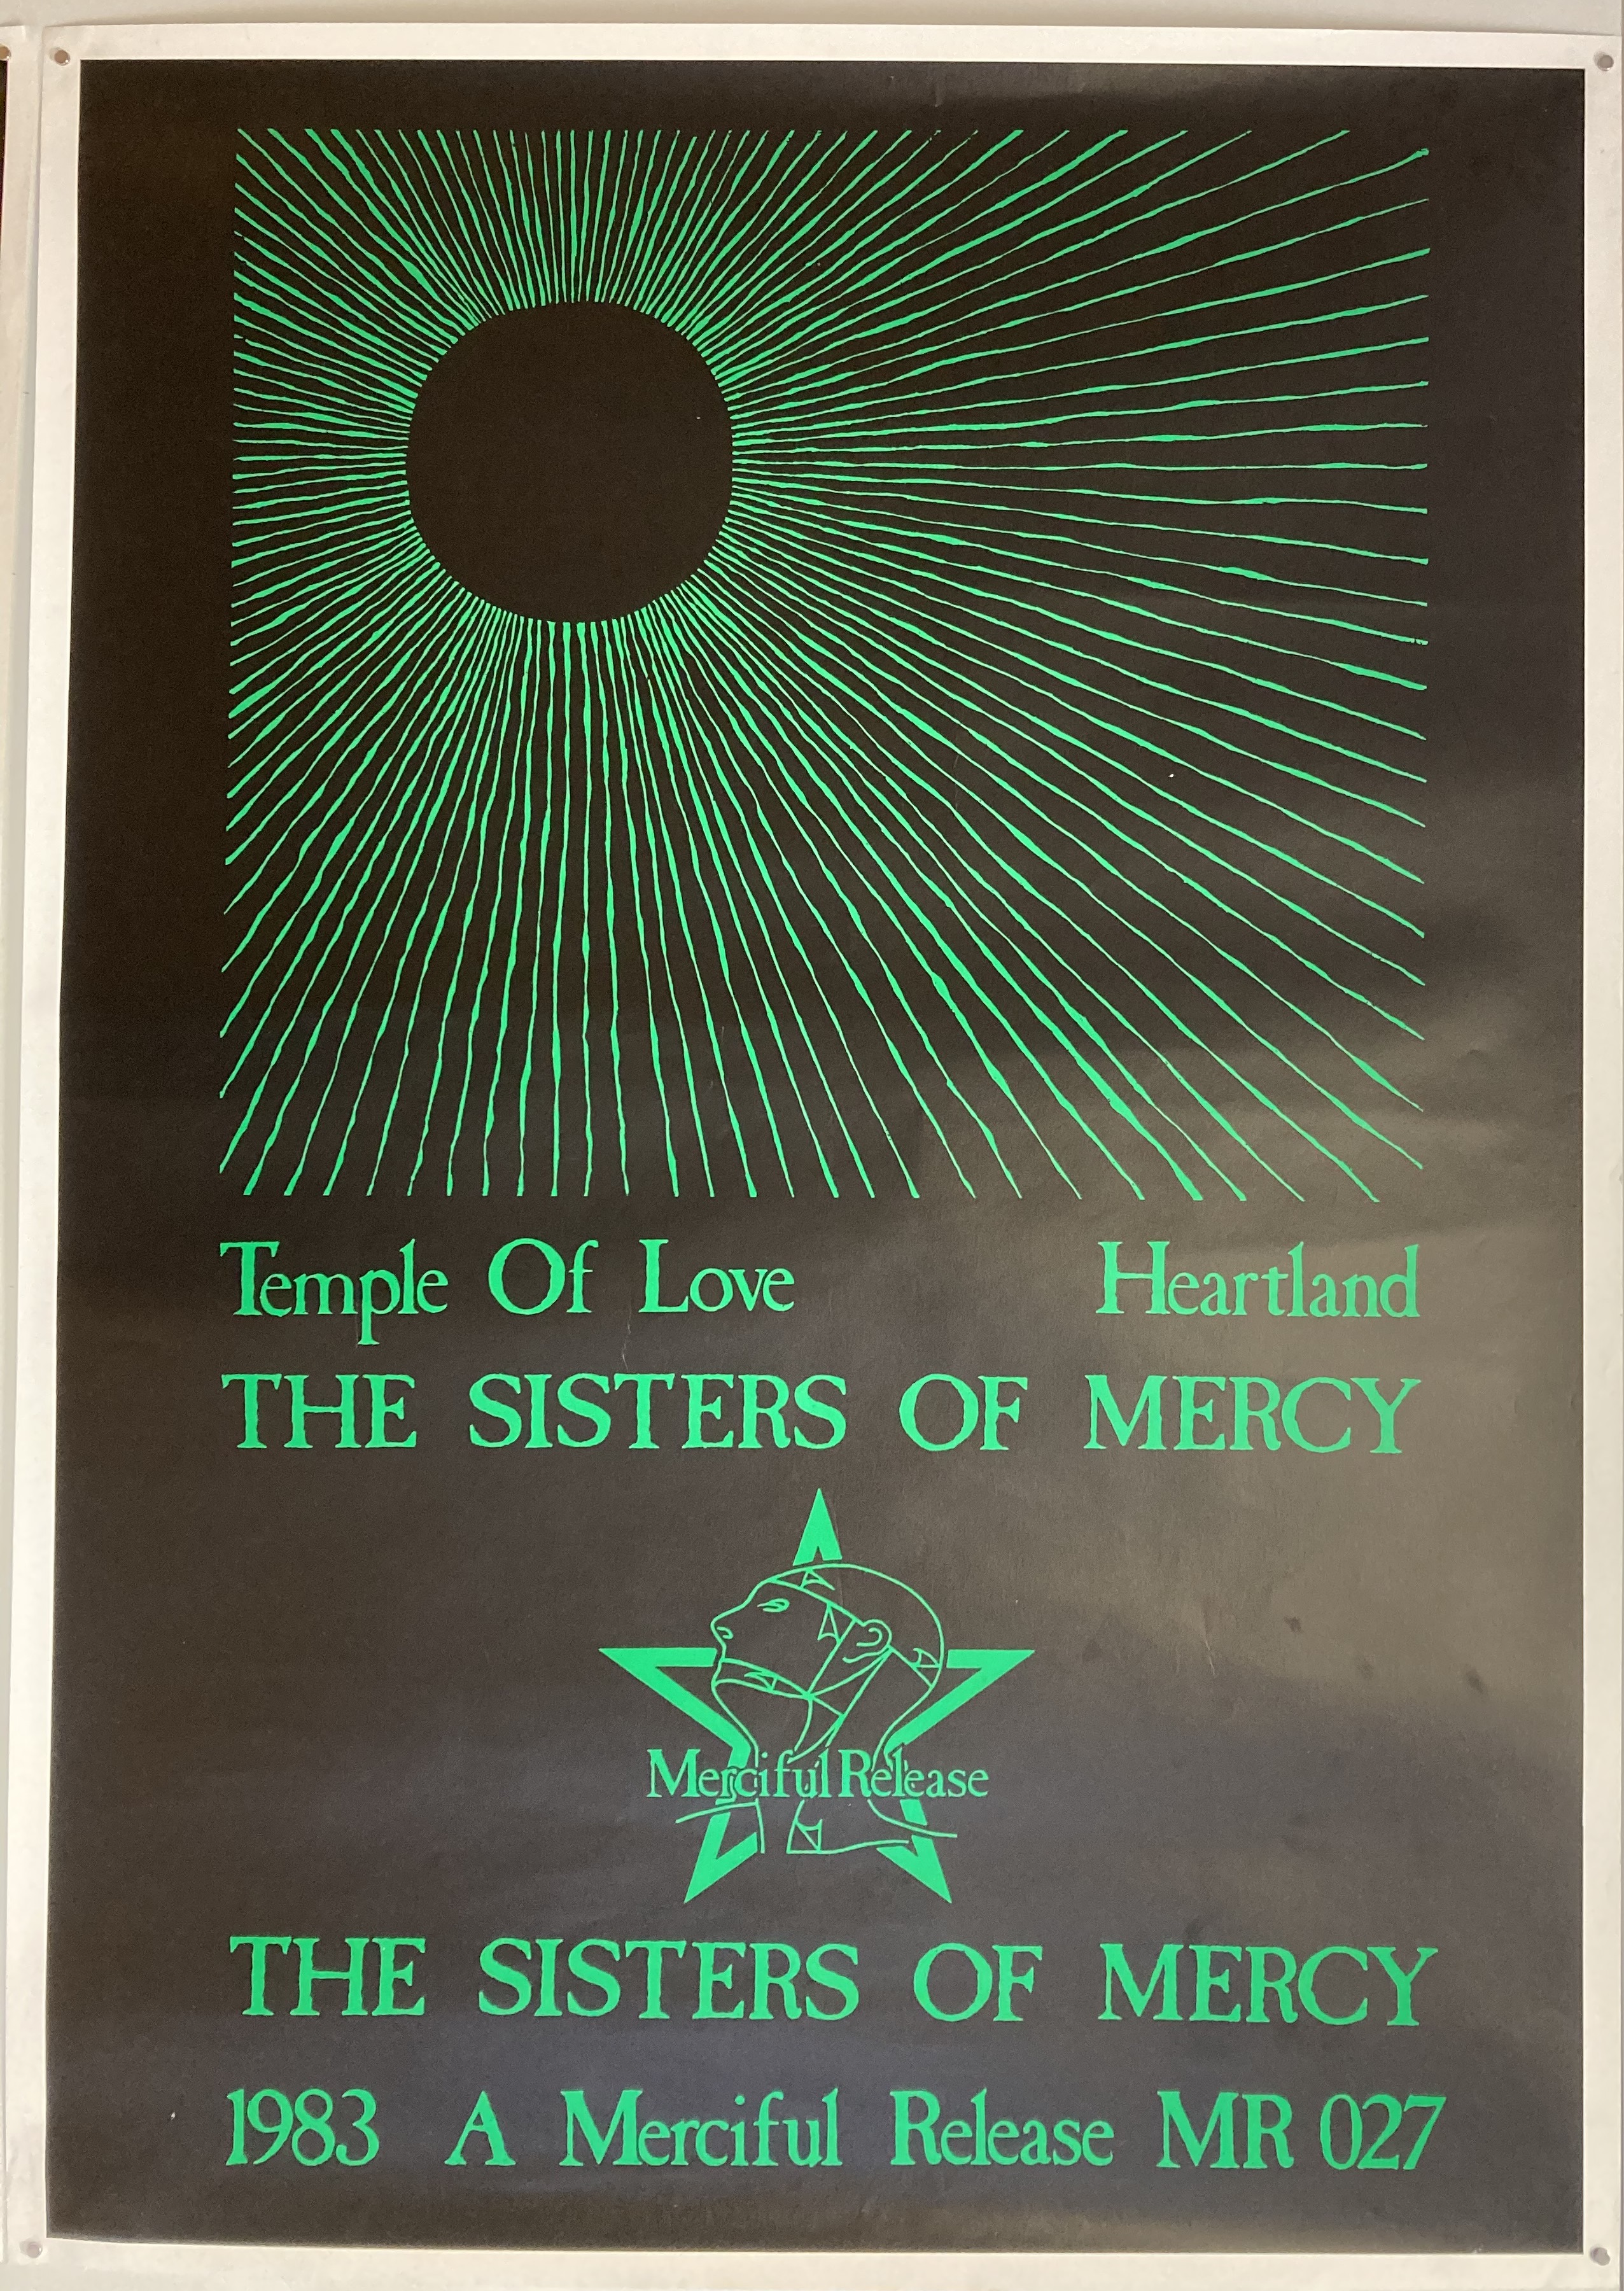 SISTERS OF MERCY POSTERS. Three Sisters of Mercy posters. - Image 2 of 4